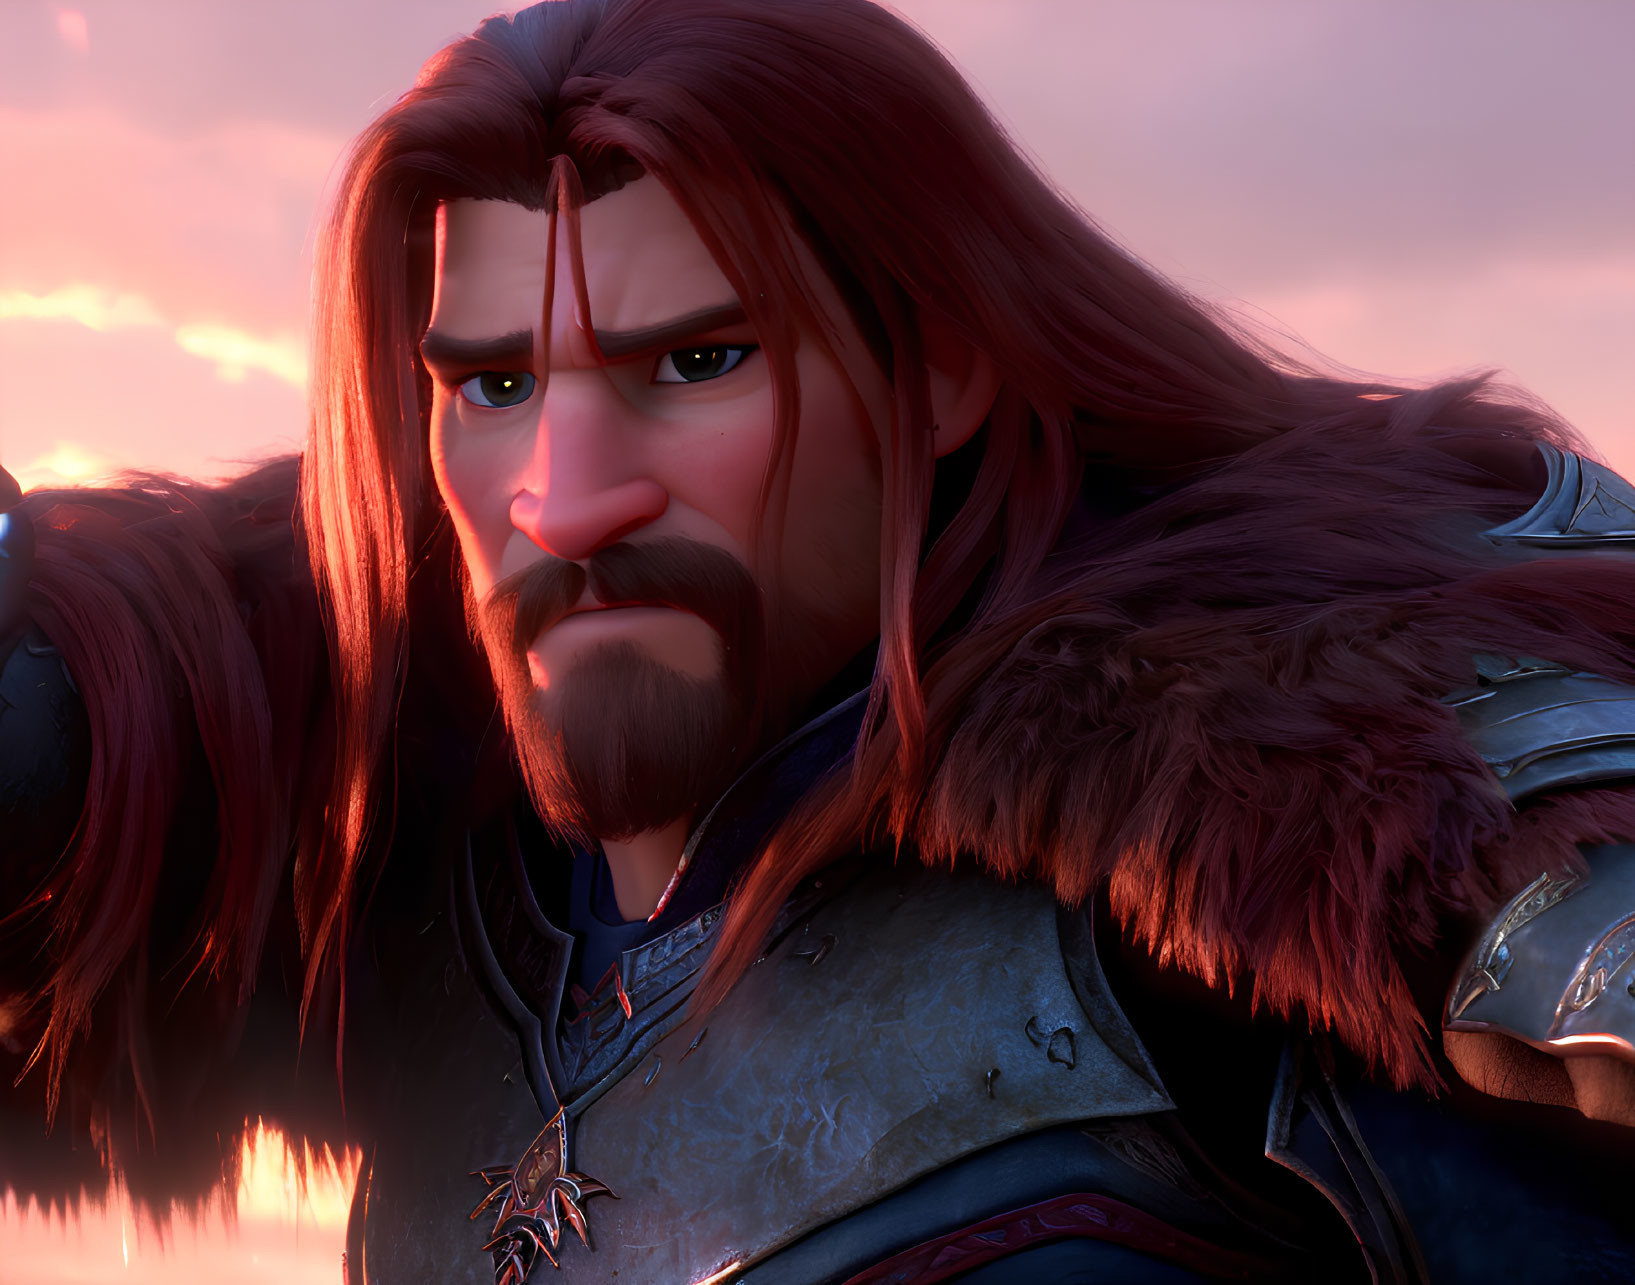 Male Character with Long Red Hair and Armor in 3D Animation